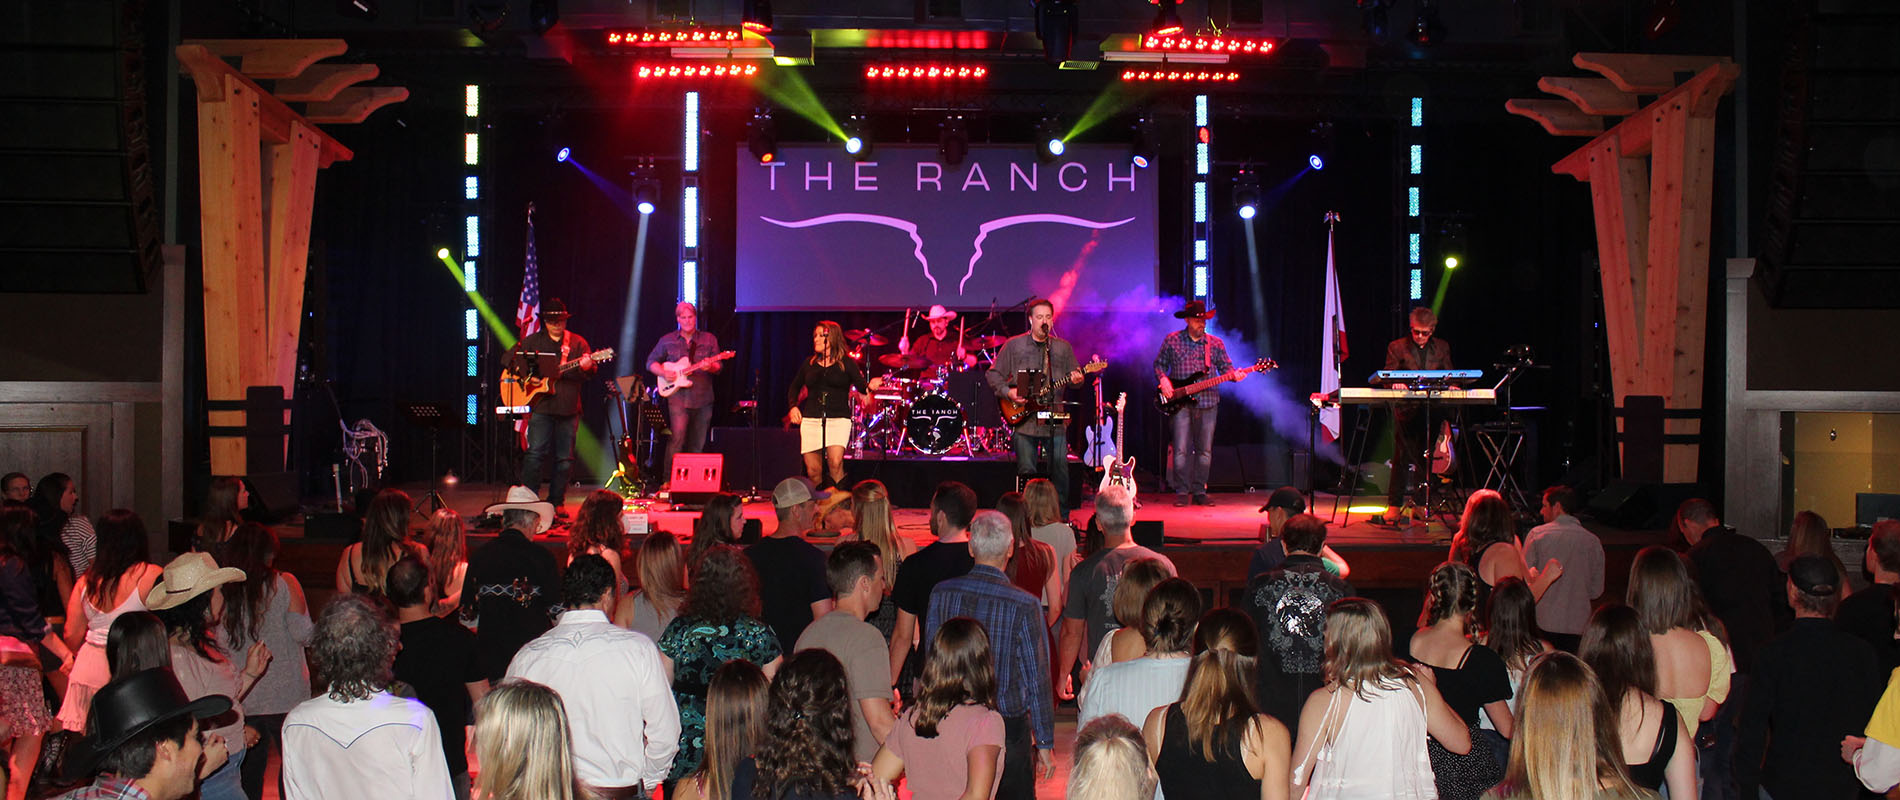 The RANCH Saloon Stage and Dance Floor